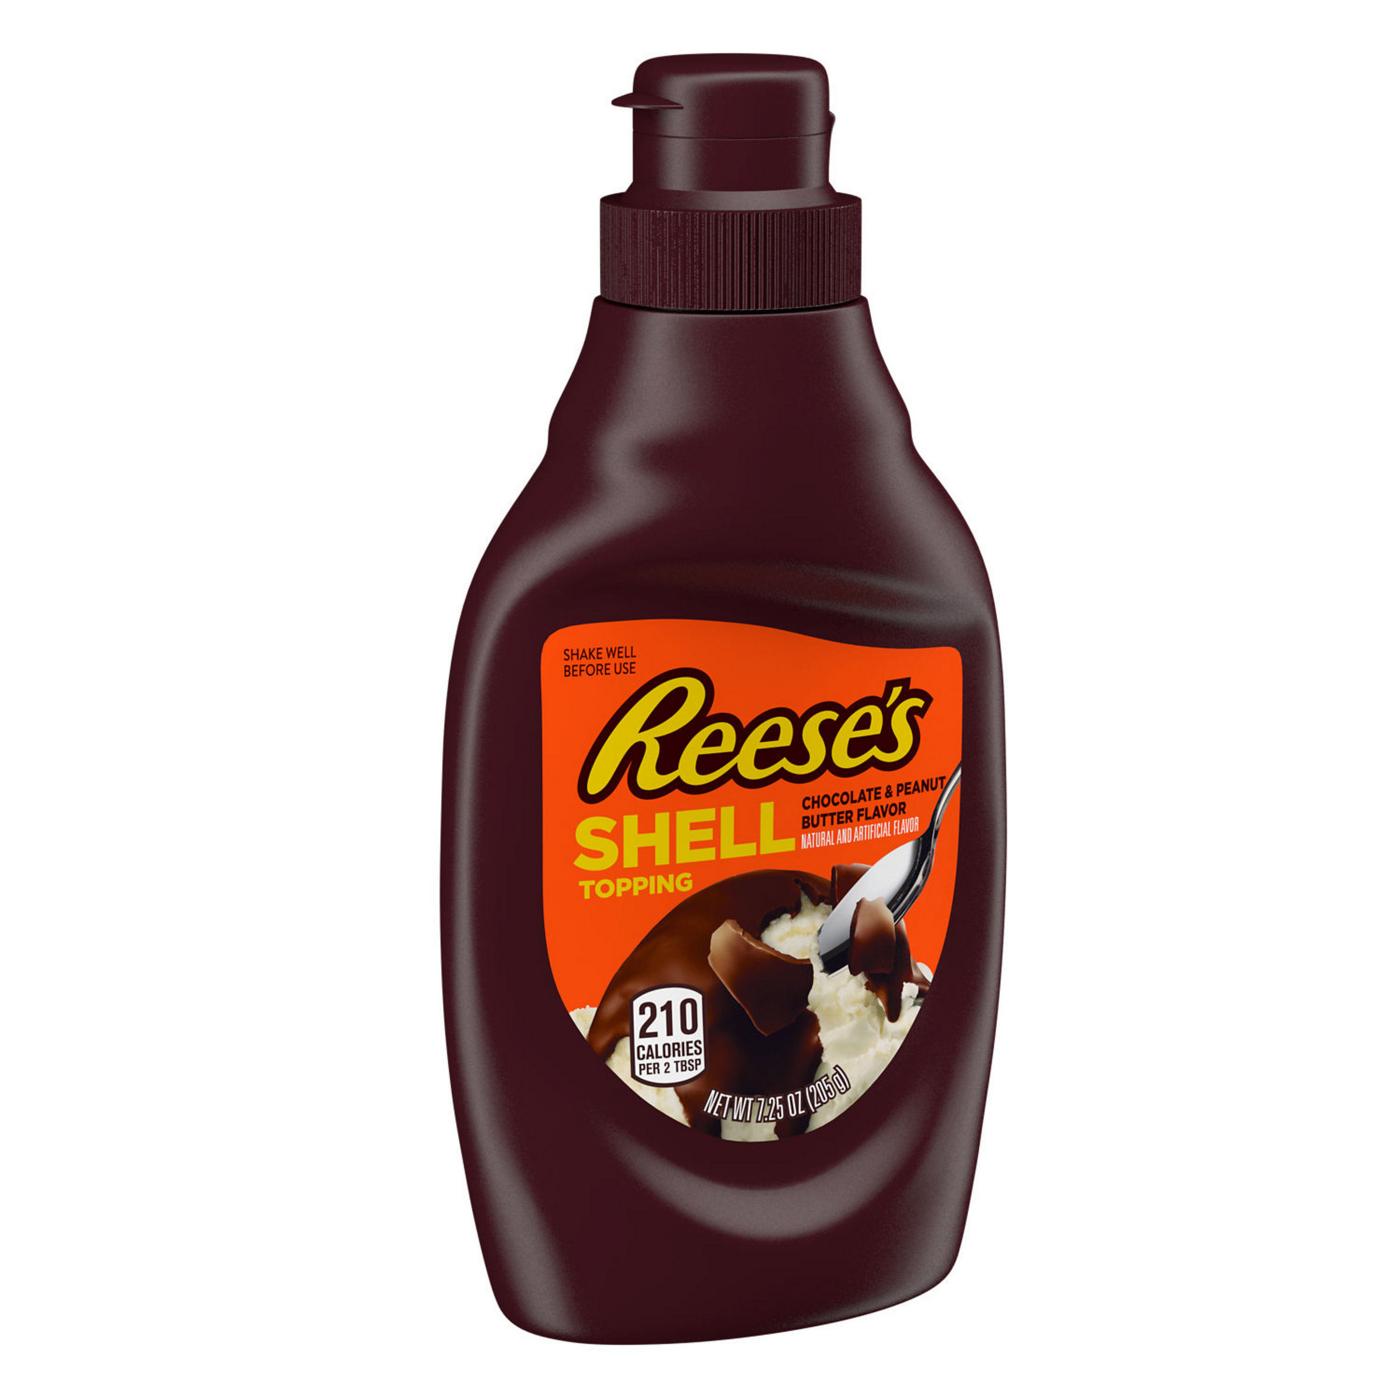 Reese's Chocolate And Peanut Butter Shell Topping; image 3 of 3